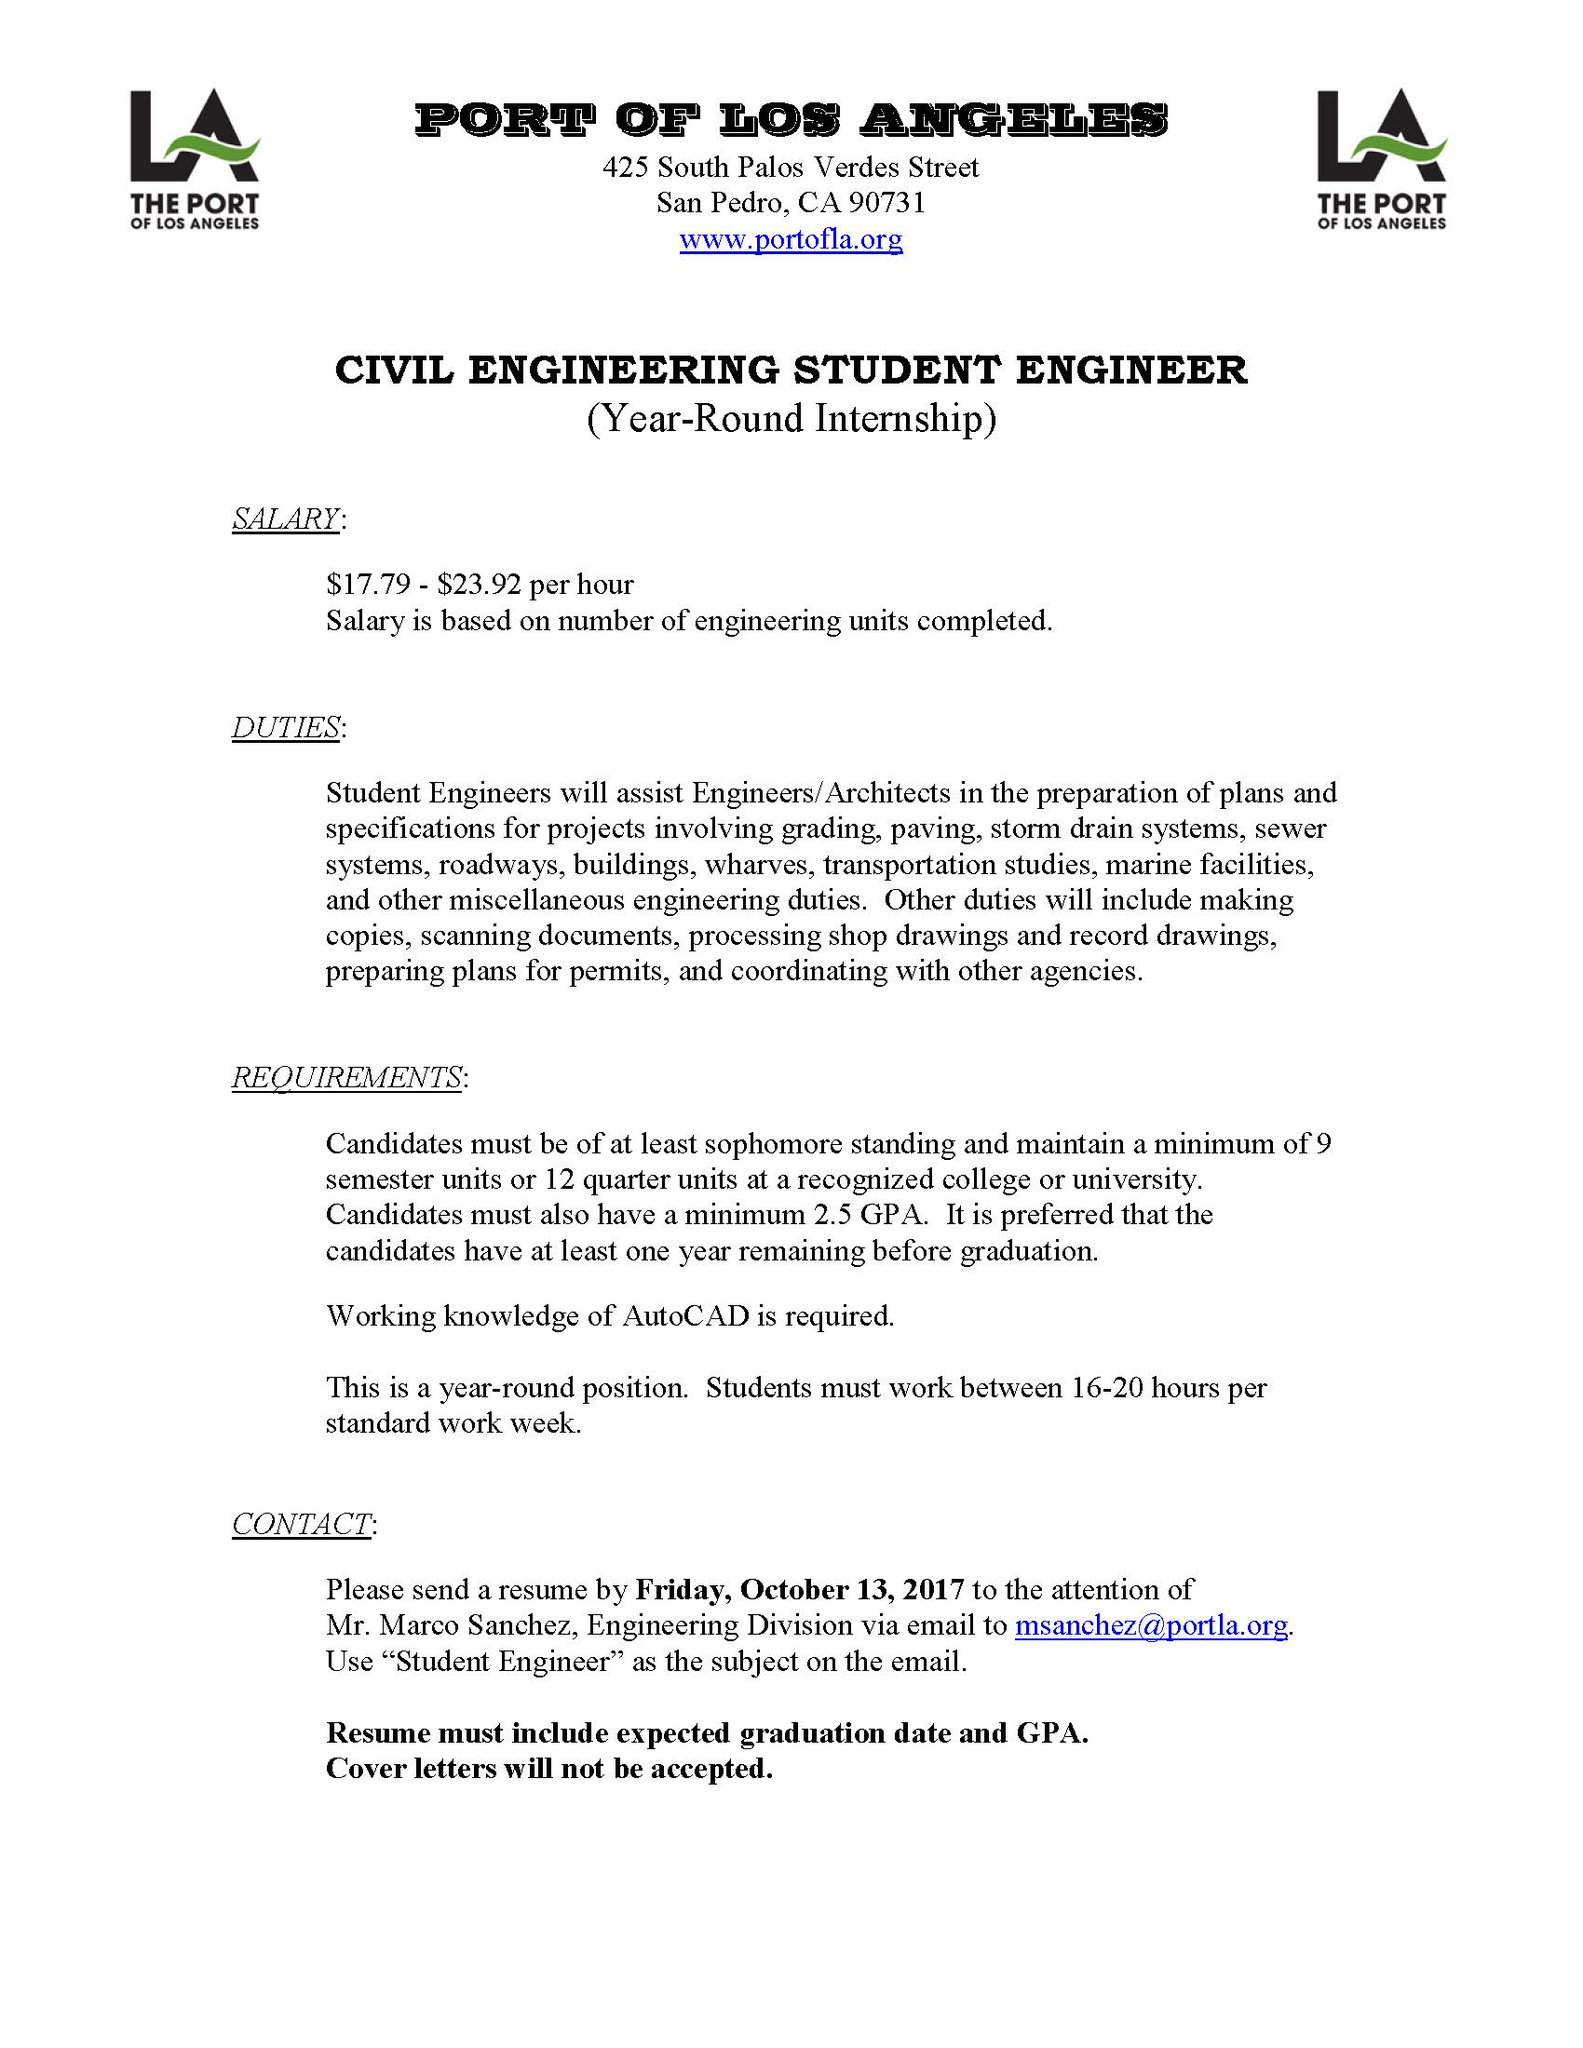 Cover Letter For Civil Engineering Internship - 200+ Cover ...